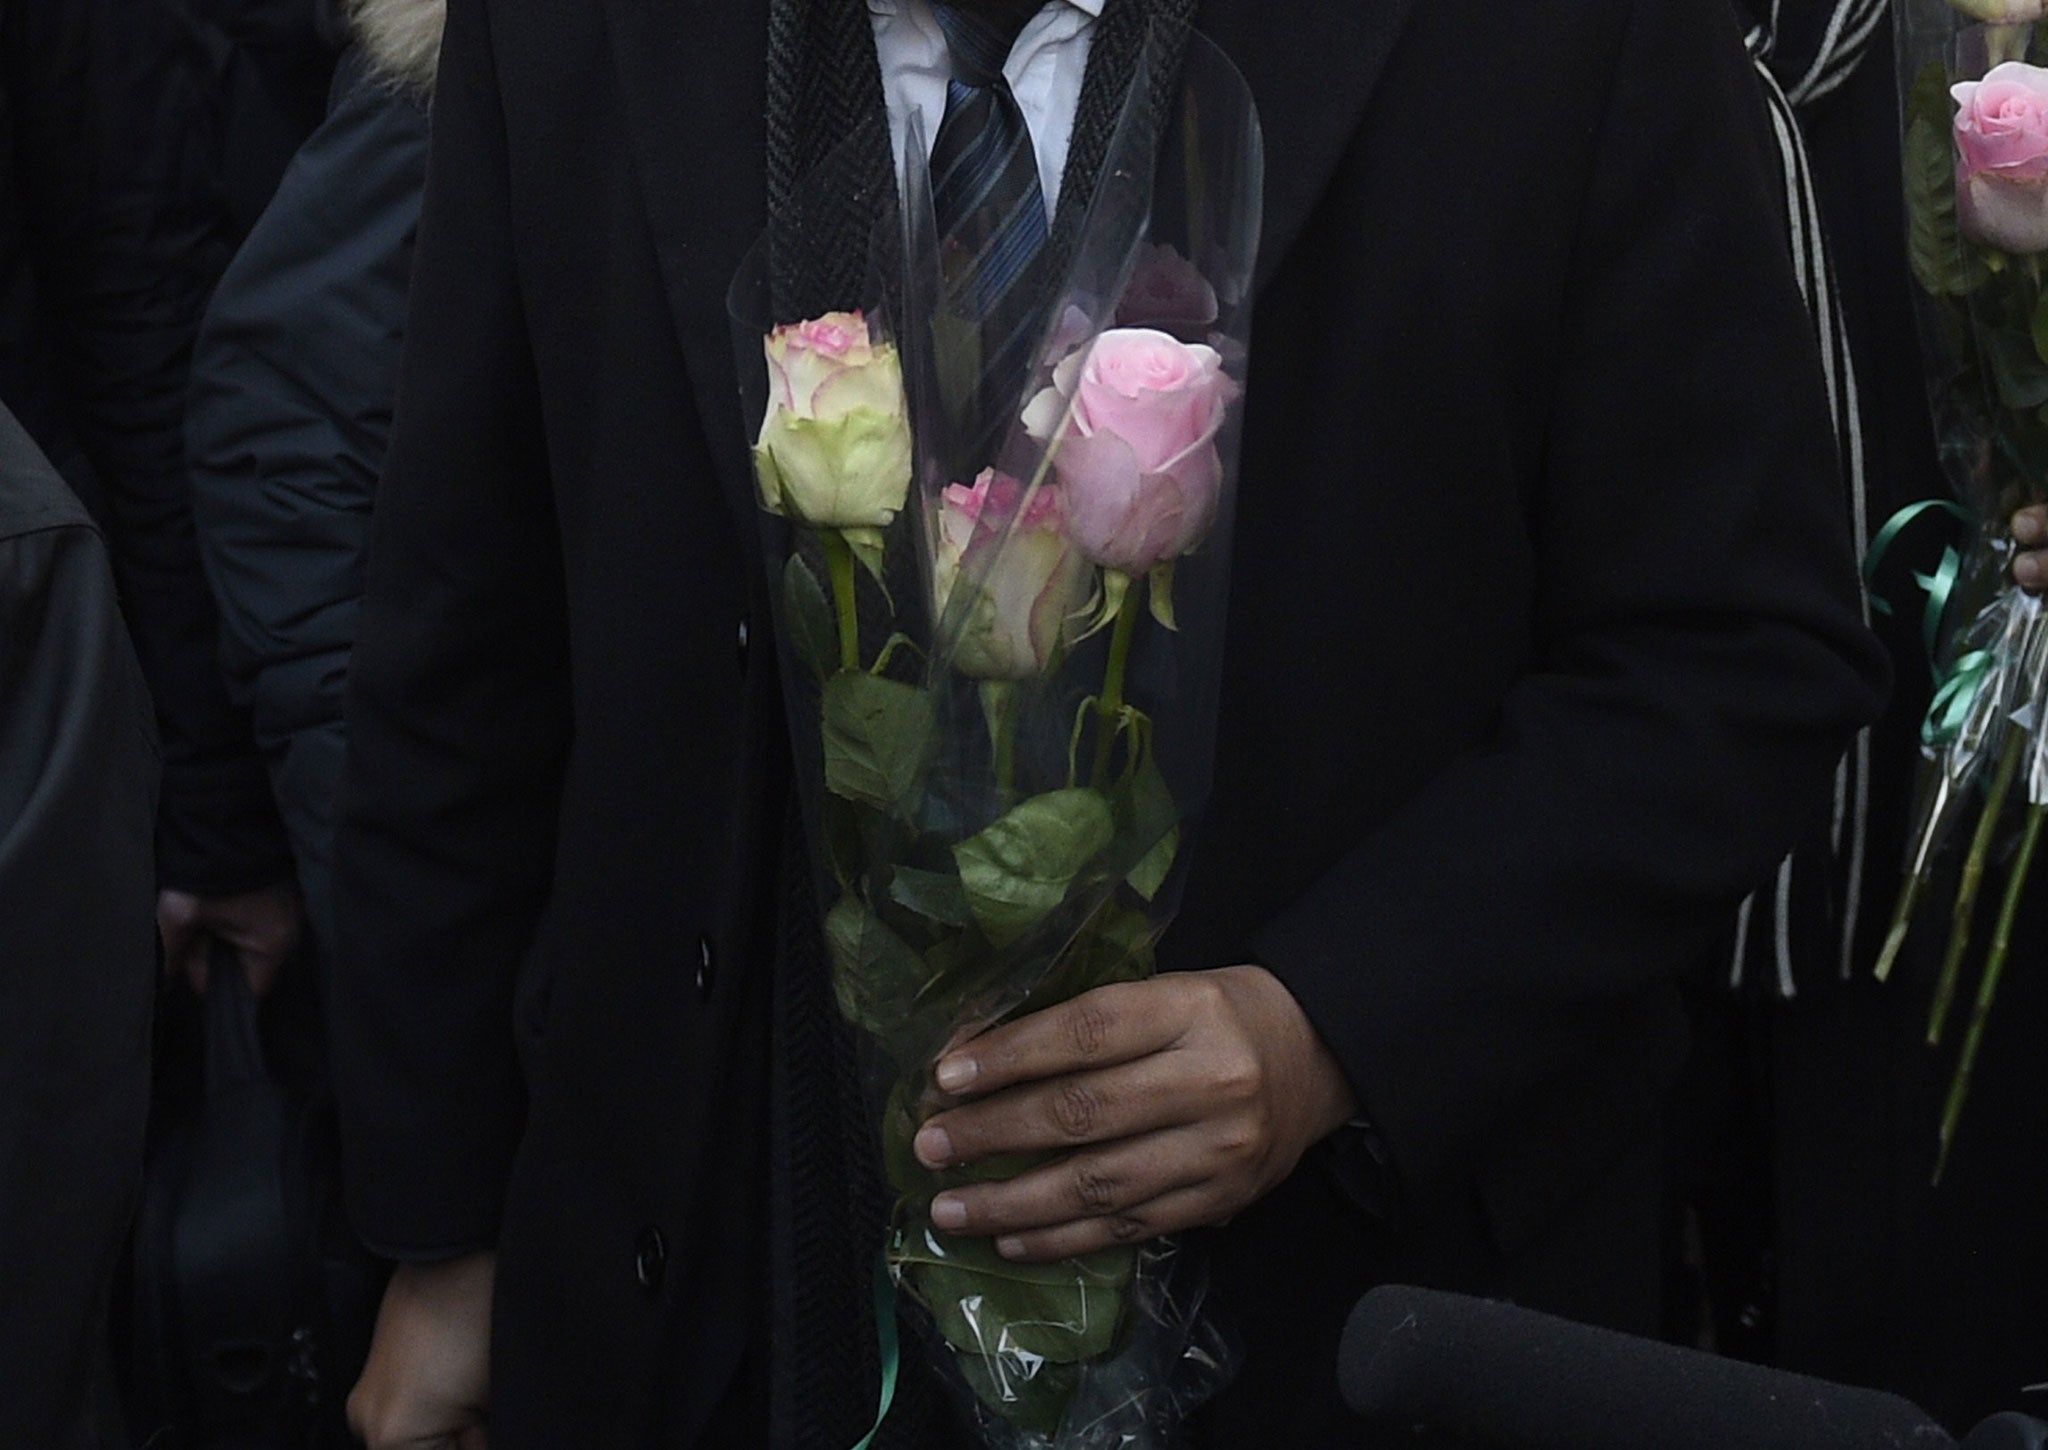 The Imam of the Mosque in Drancy and president of the French associtaion of Imam's Hassen Chalghoumi lays a floral tribute